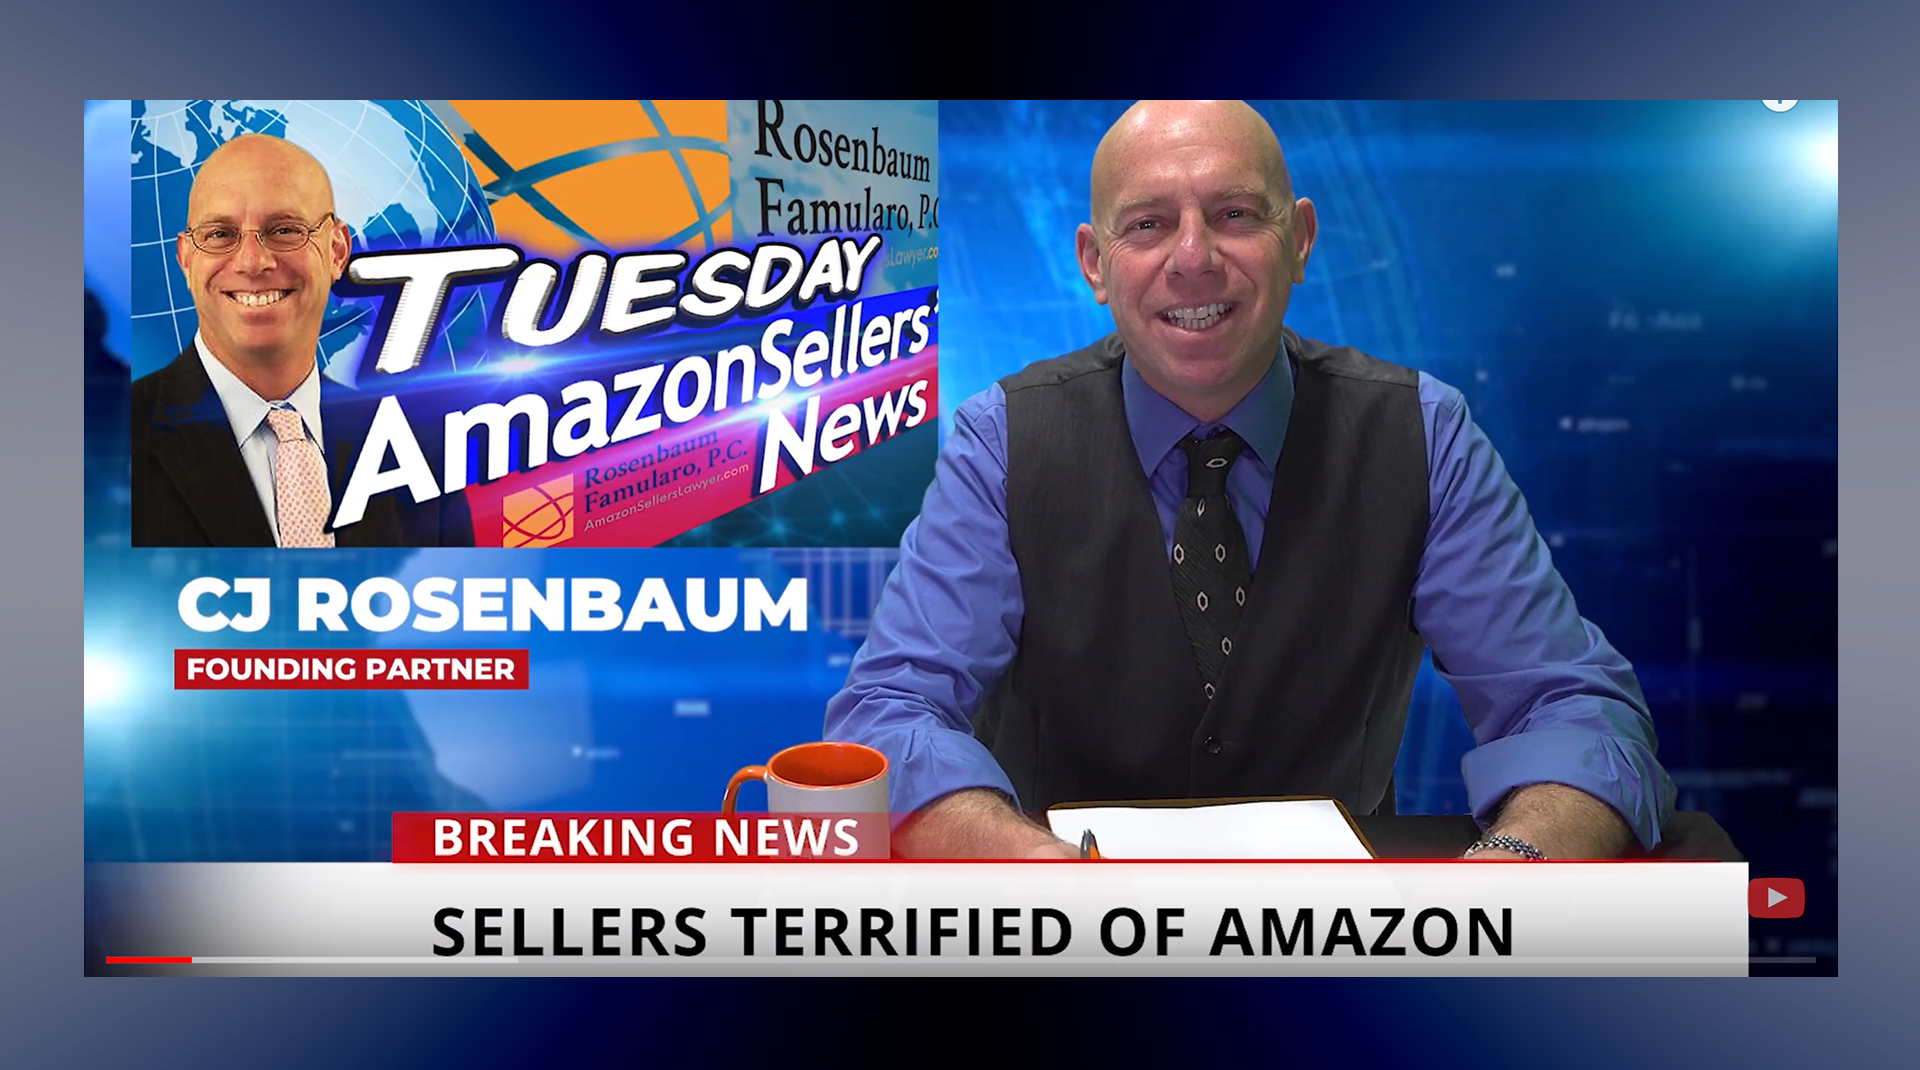 Amazon Sellers' News 12/17/19 - Amazon Sellers Terrified of New Policy Update & Chinese Problems Arriving in the United States